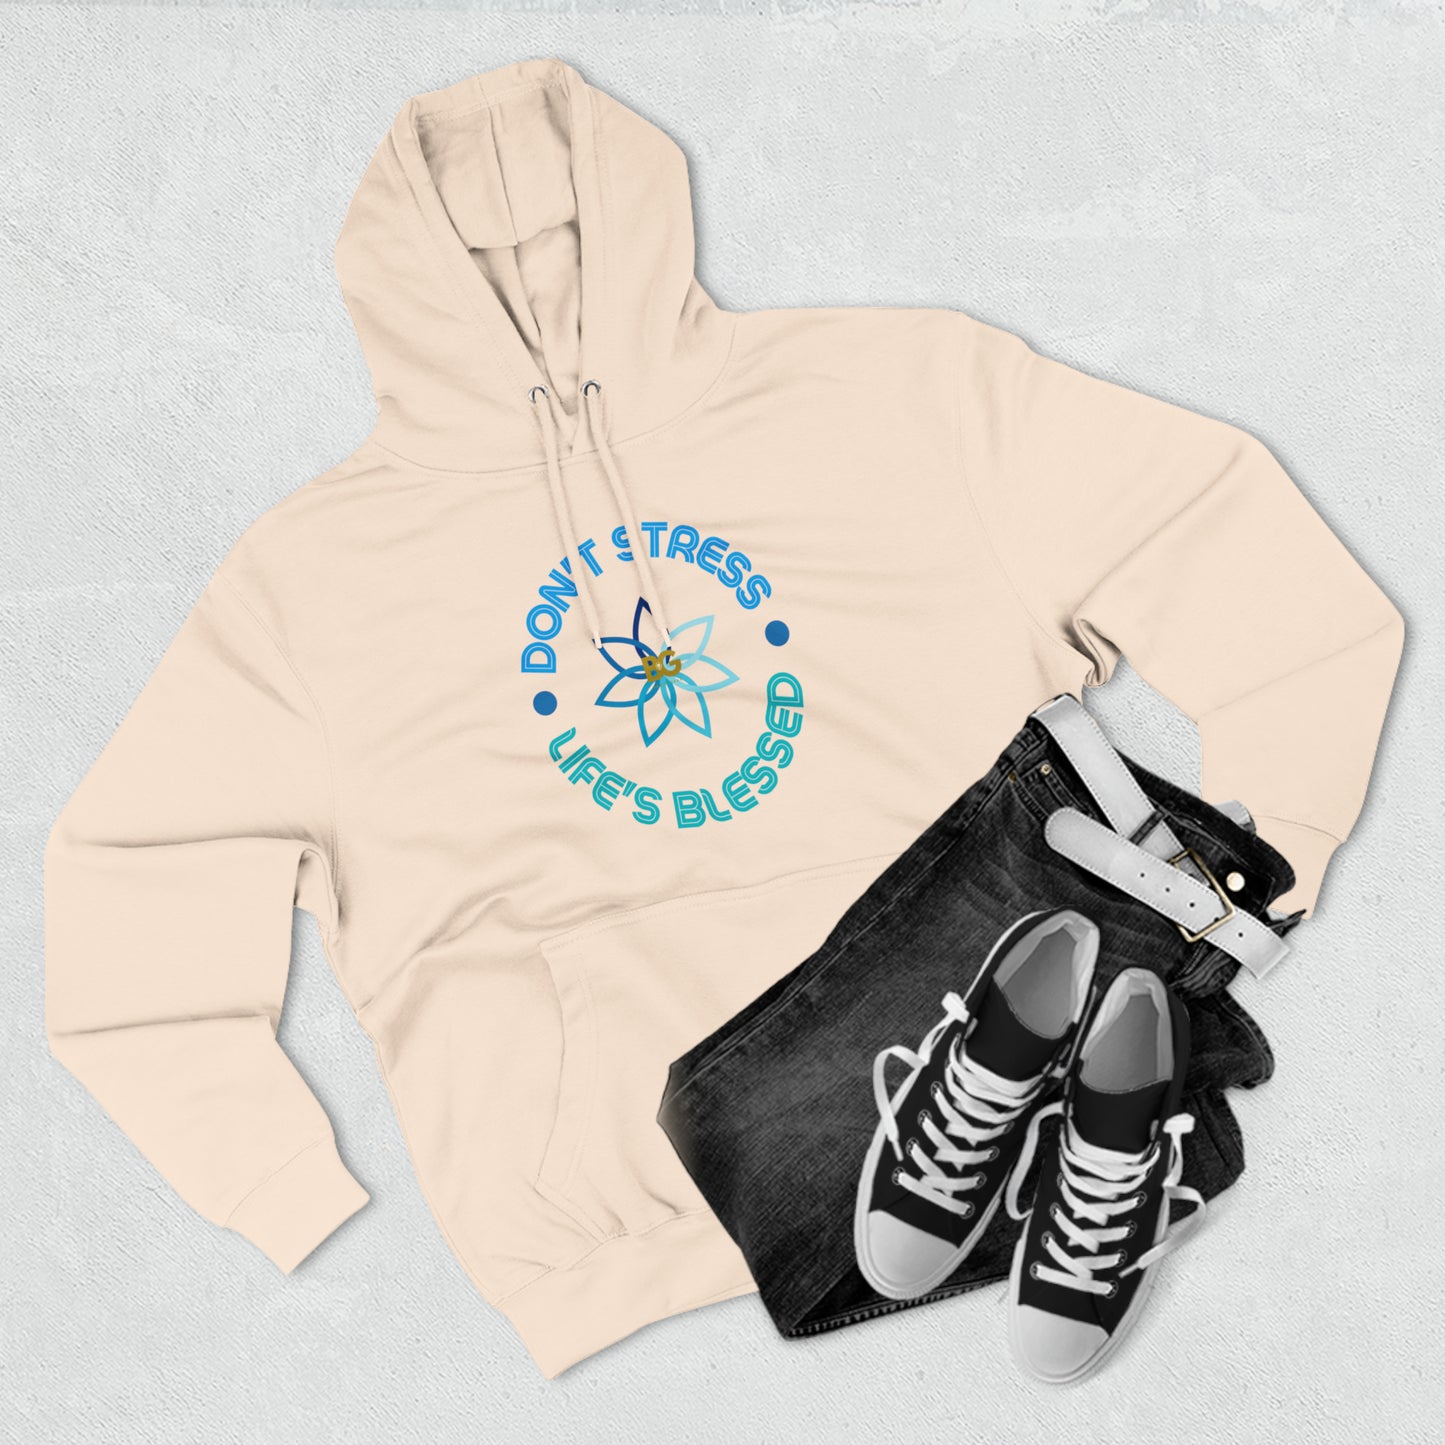 BG "Don't Stress - Life's Blessed" Premium Pullover Hoodie